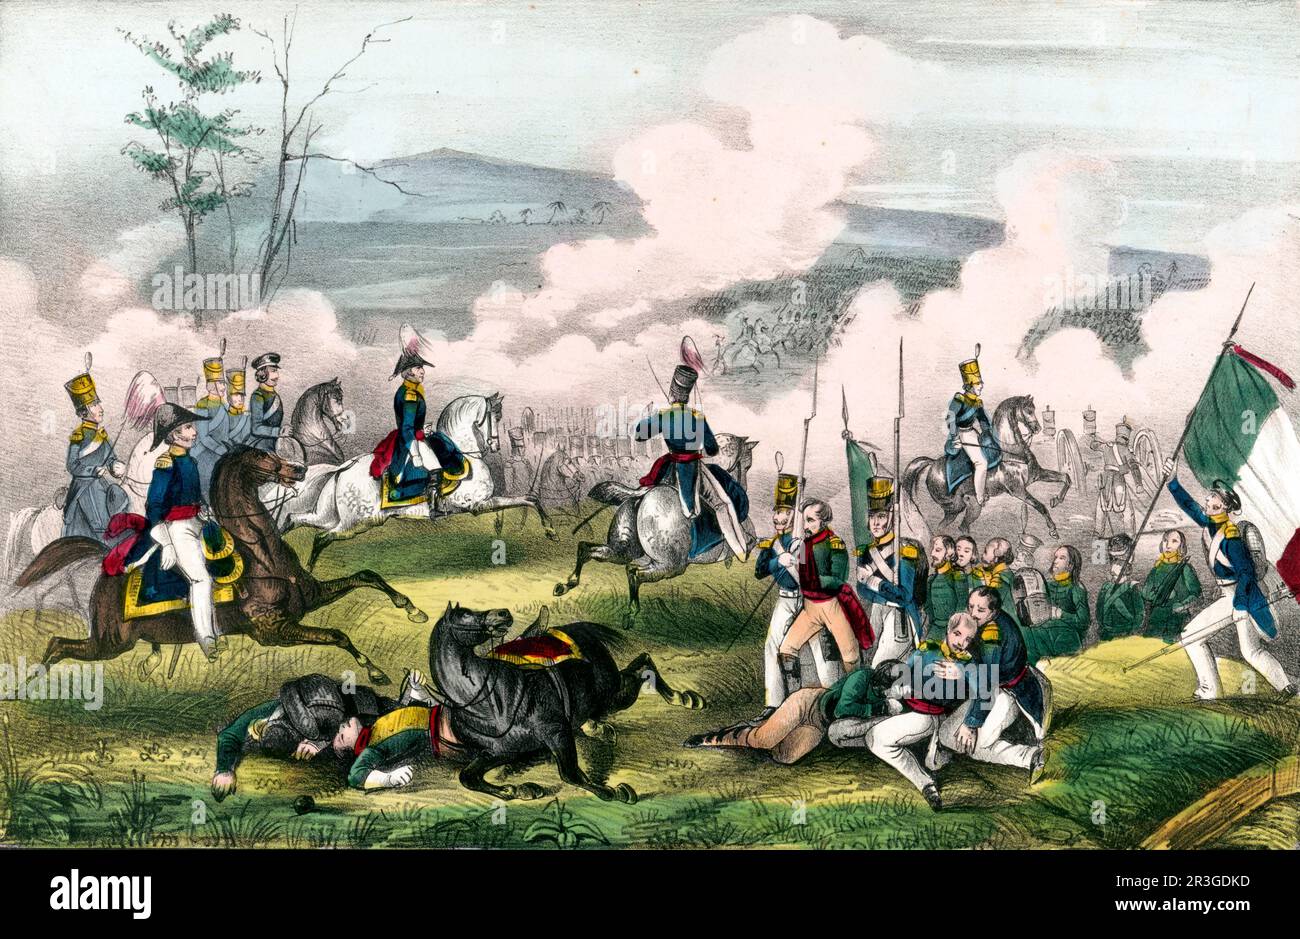 May 8, 1846 - Battle of Palo Alto, the first battle of the Mexican American War. Stock Photo